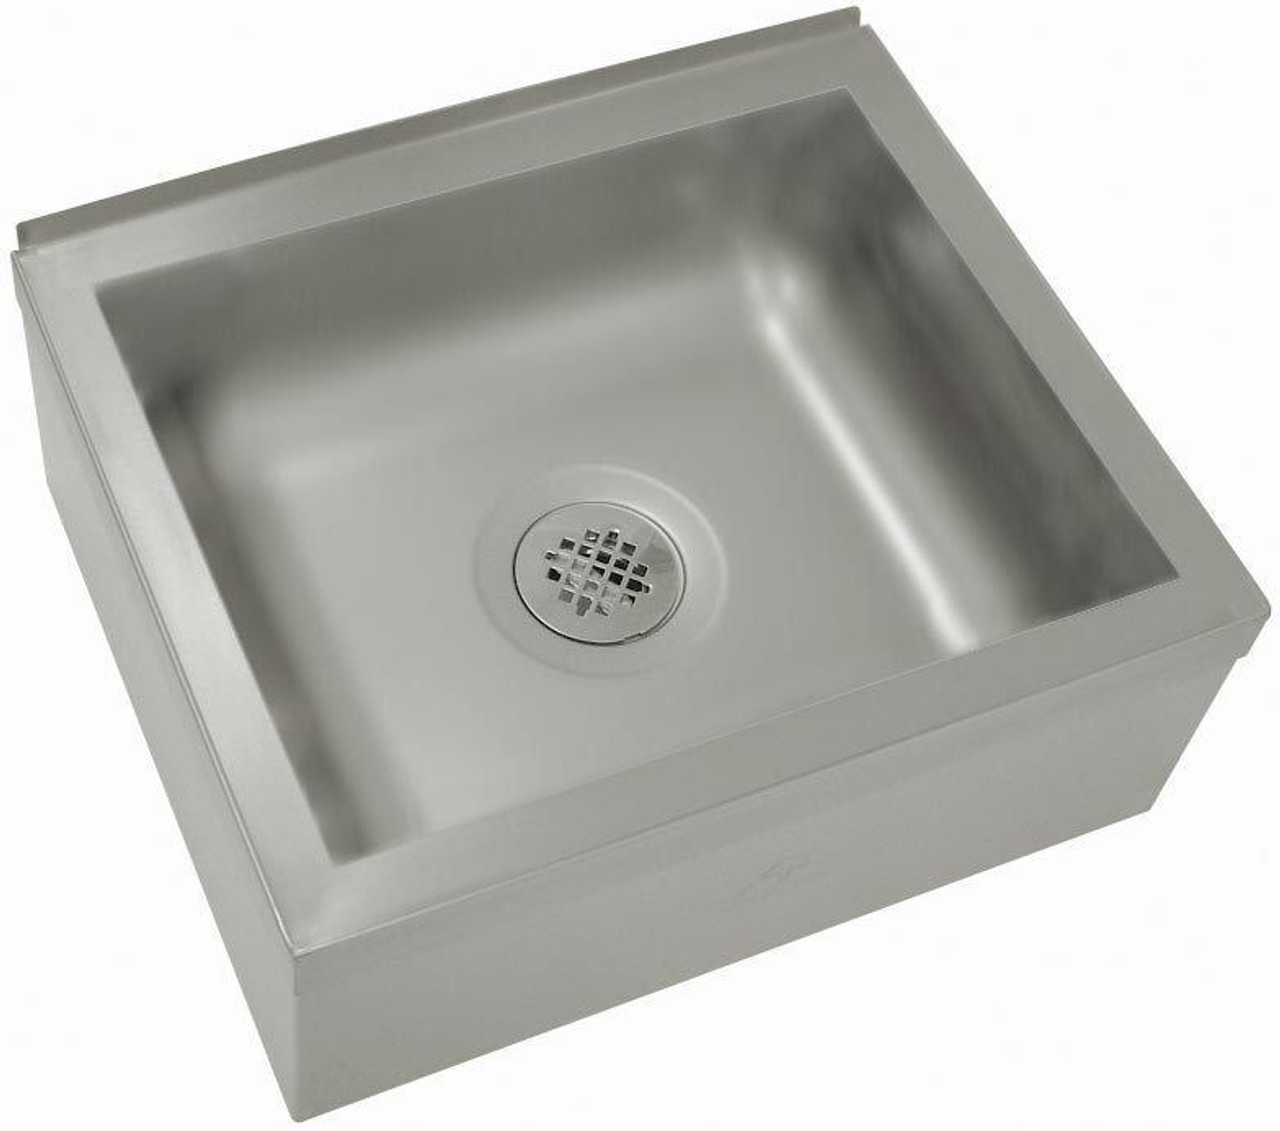 Floor Mounted Mop Sink  25"W x 21"D x 10"H, Bowl Size: 16" x 20" 